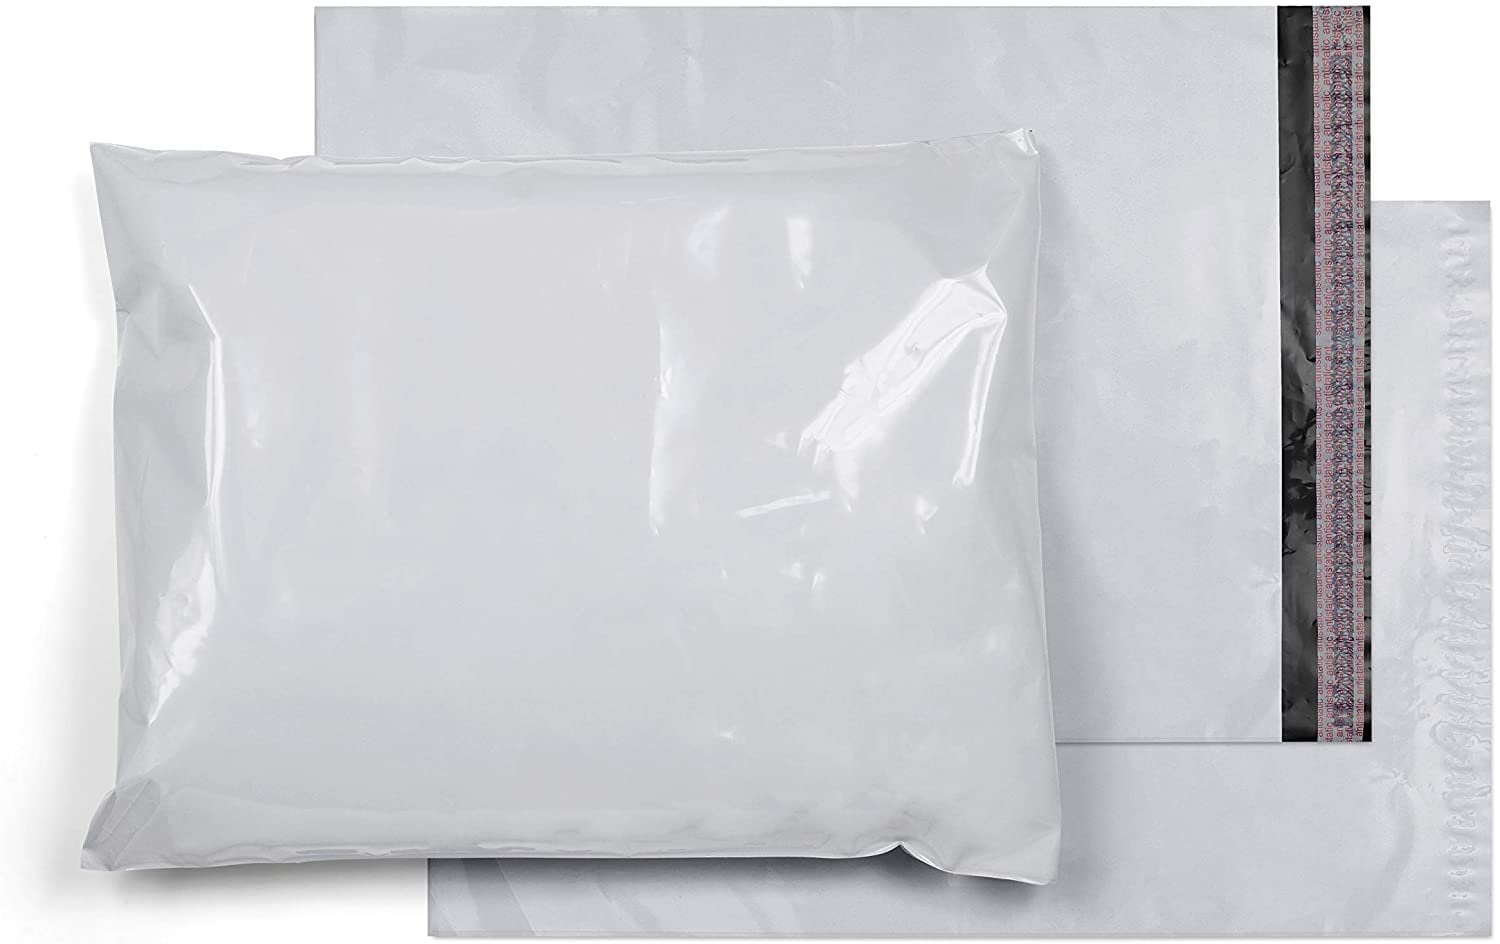 2000 Poly Bags 6x9 Premium 2 Mil Self Seal Poly Mailers Quality Bags 6 x 9